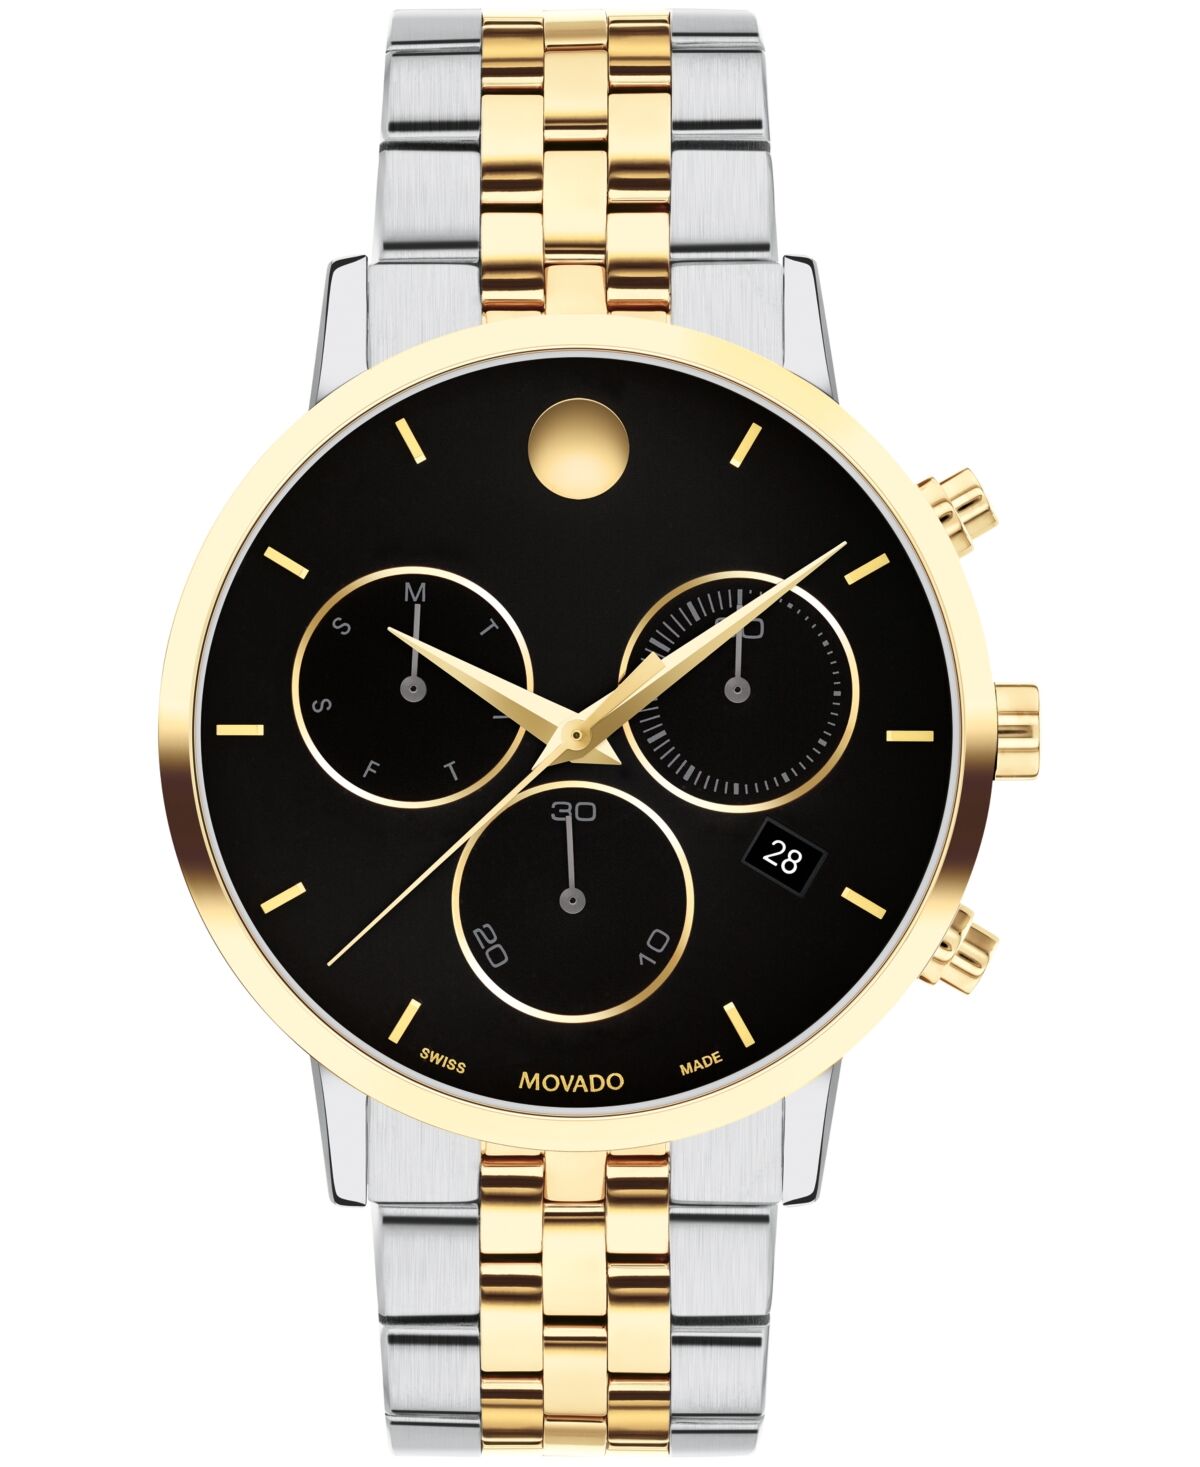 Movado Men's Museum Classic Swiss Quartz Chrono Two Tone Stainless Steel and Light Yellow Pvd Watch 42mm - Two-Tone